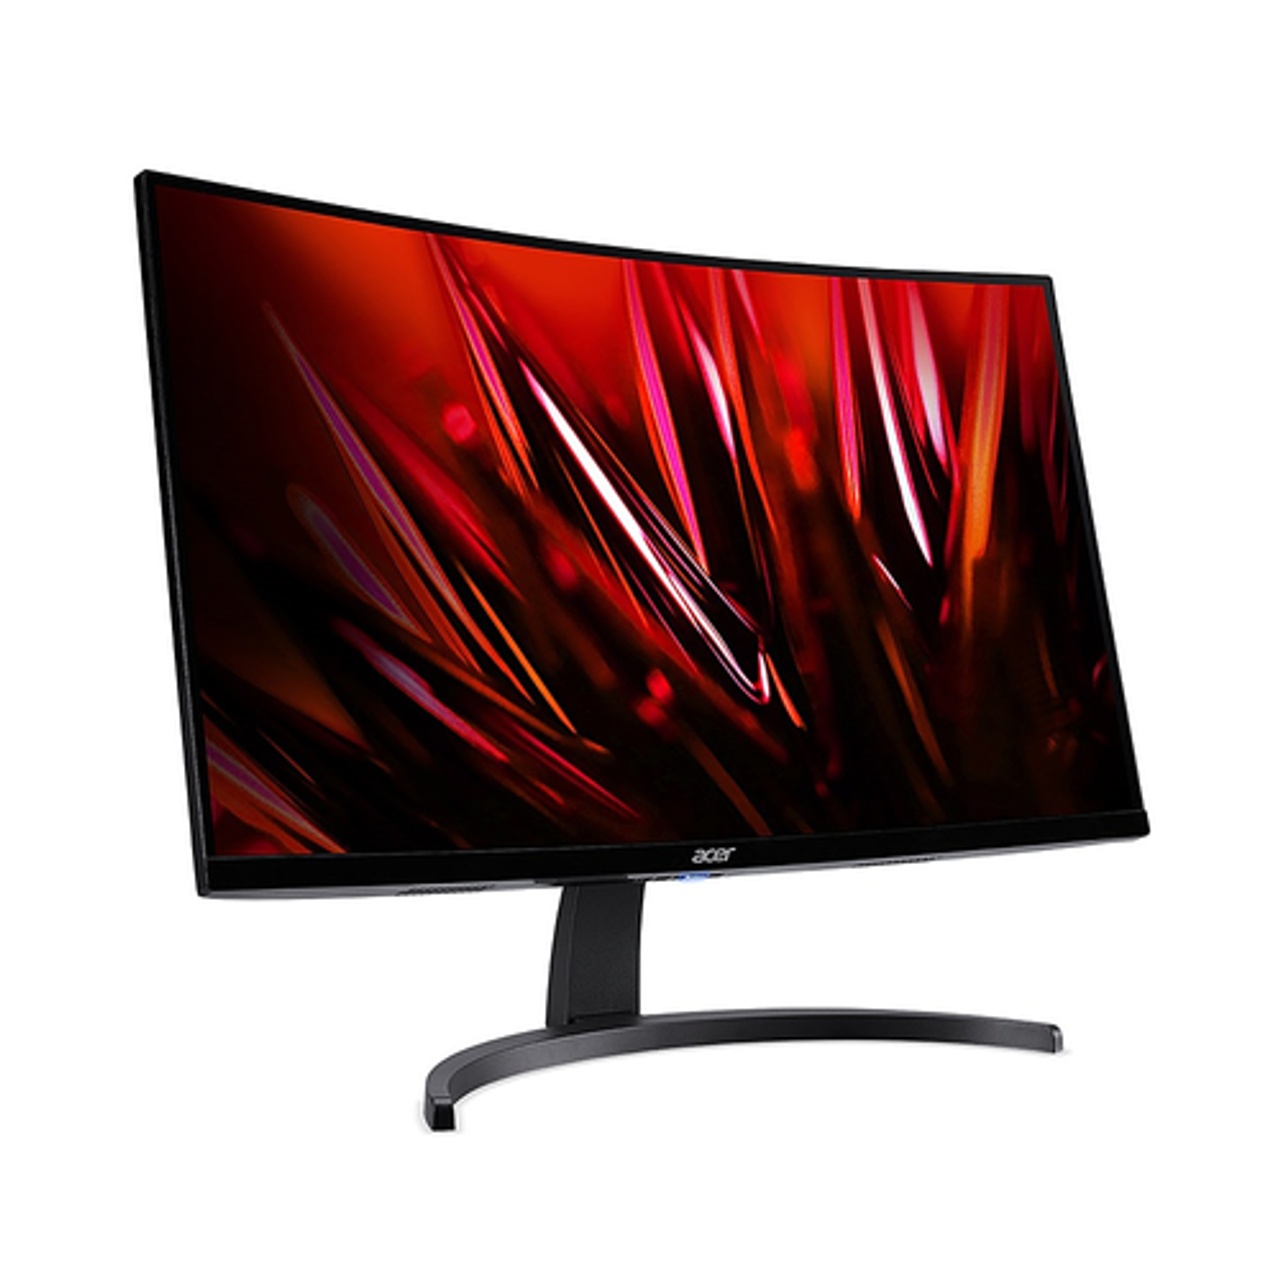 Acer - Nitro ED273 S3biip 27" FHD Curved Gaming Monitor with AMD FreeSync((1 x Display Port v1.4 & 2 x HDMI 2.0 Ports) - Black